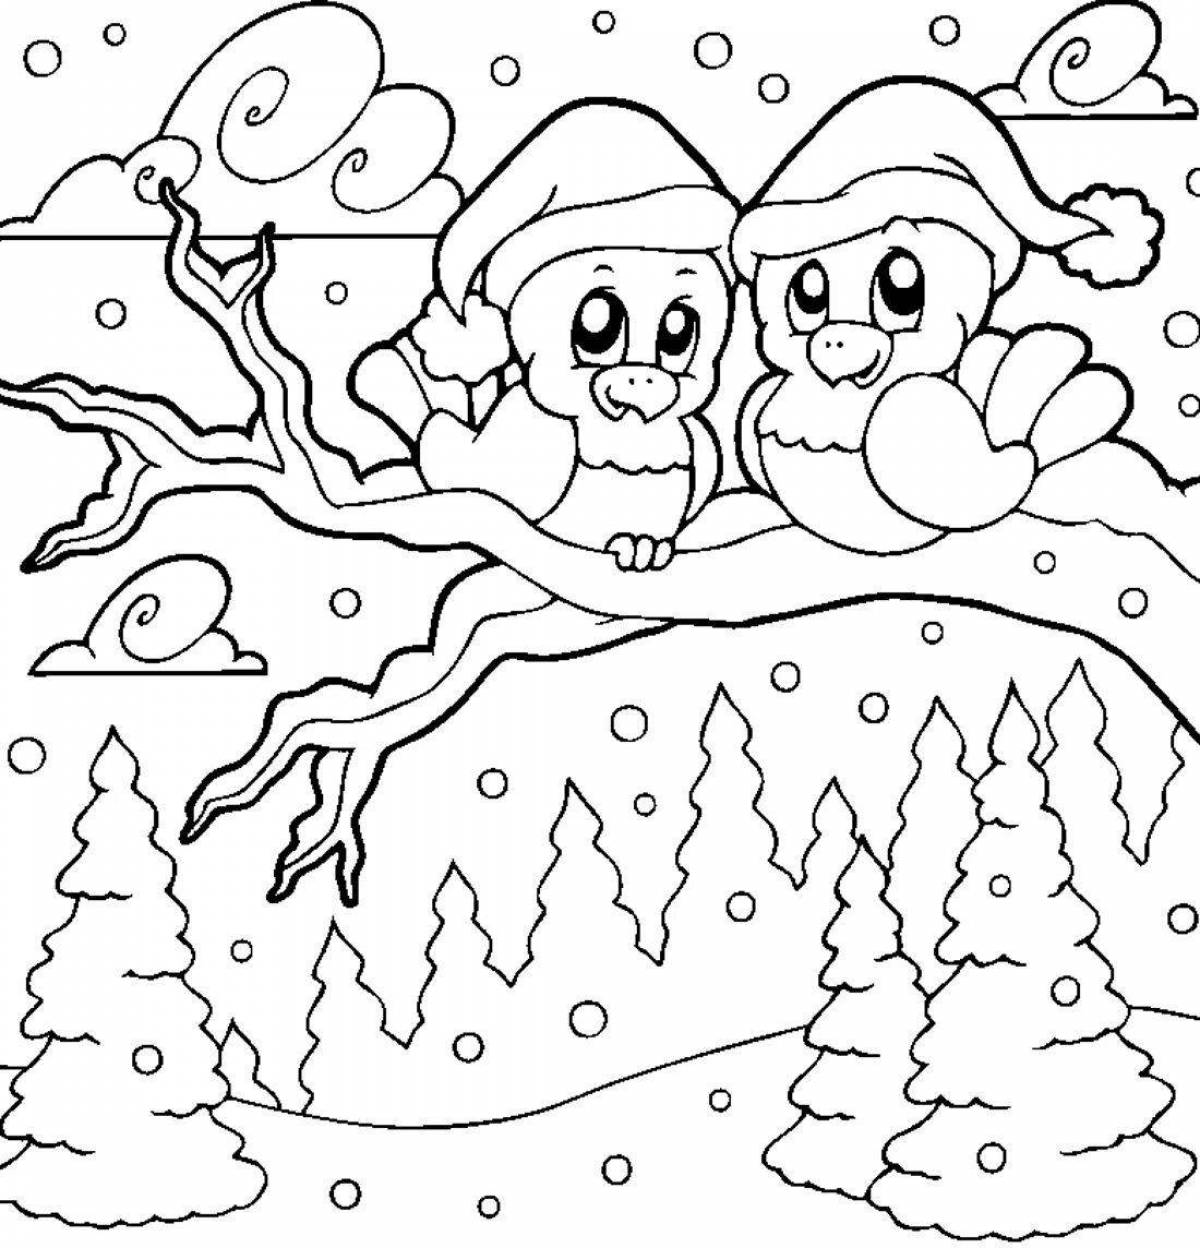 Colorful winter in the forest coloring book